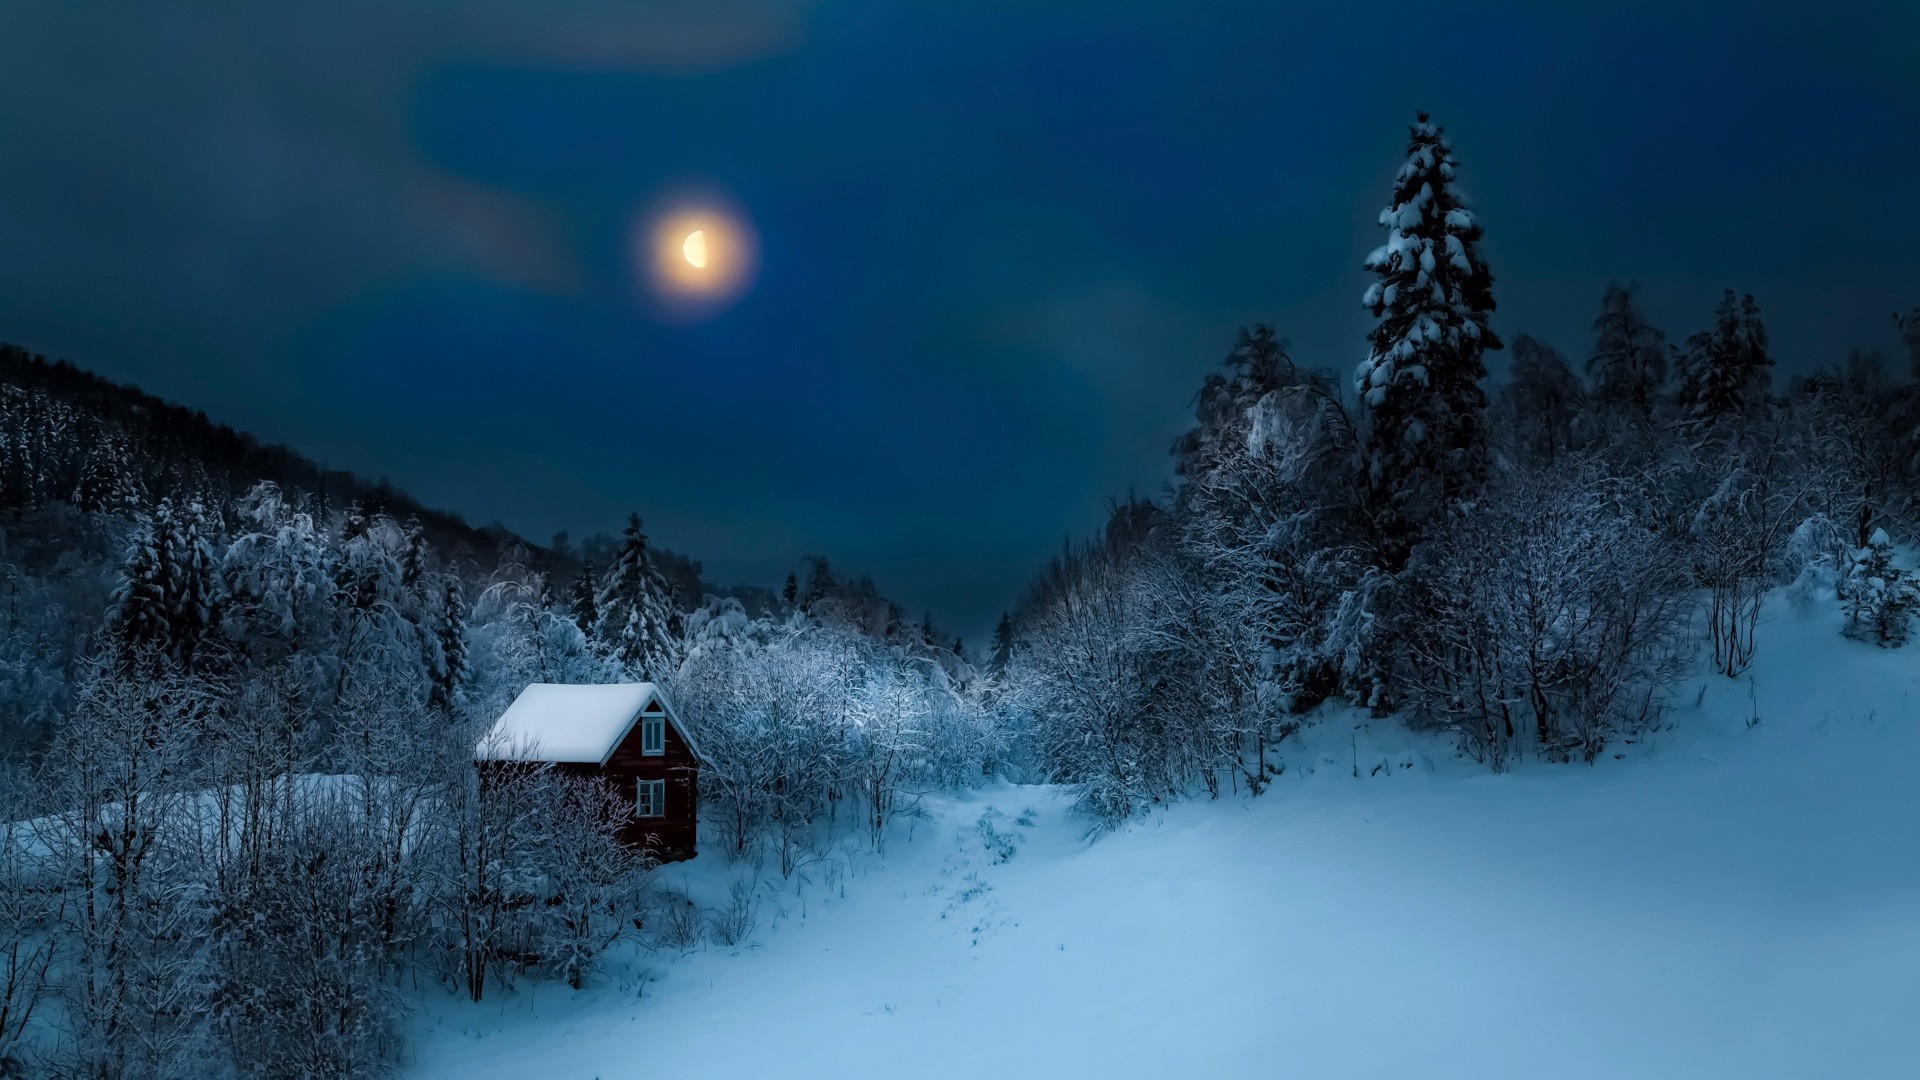 Night Snow Wallpaper Background (56+ images)